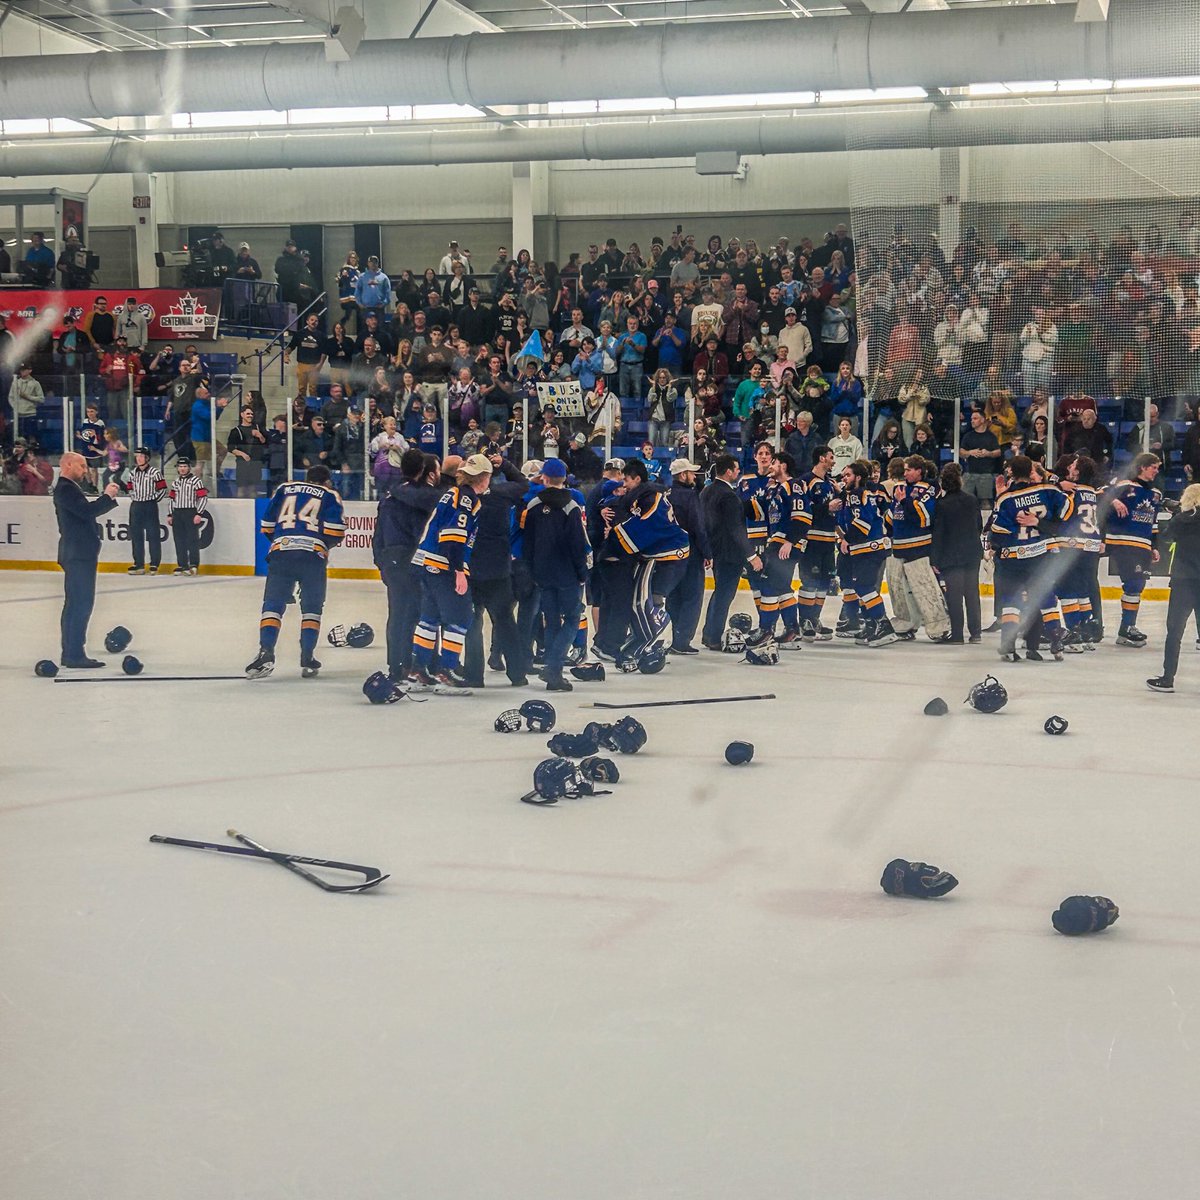 #1 IN THE OJHL & NOW #1 IN THE CJHL 

THE BLUES ARE NATIONAL CHAMPS ❗️